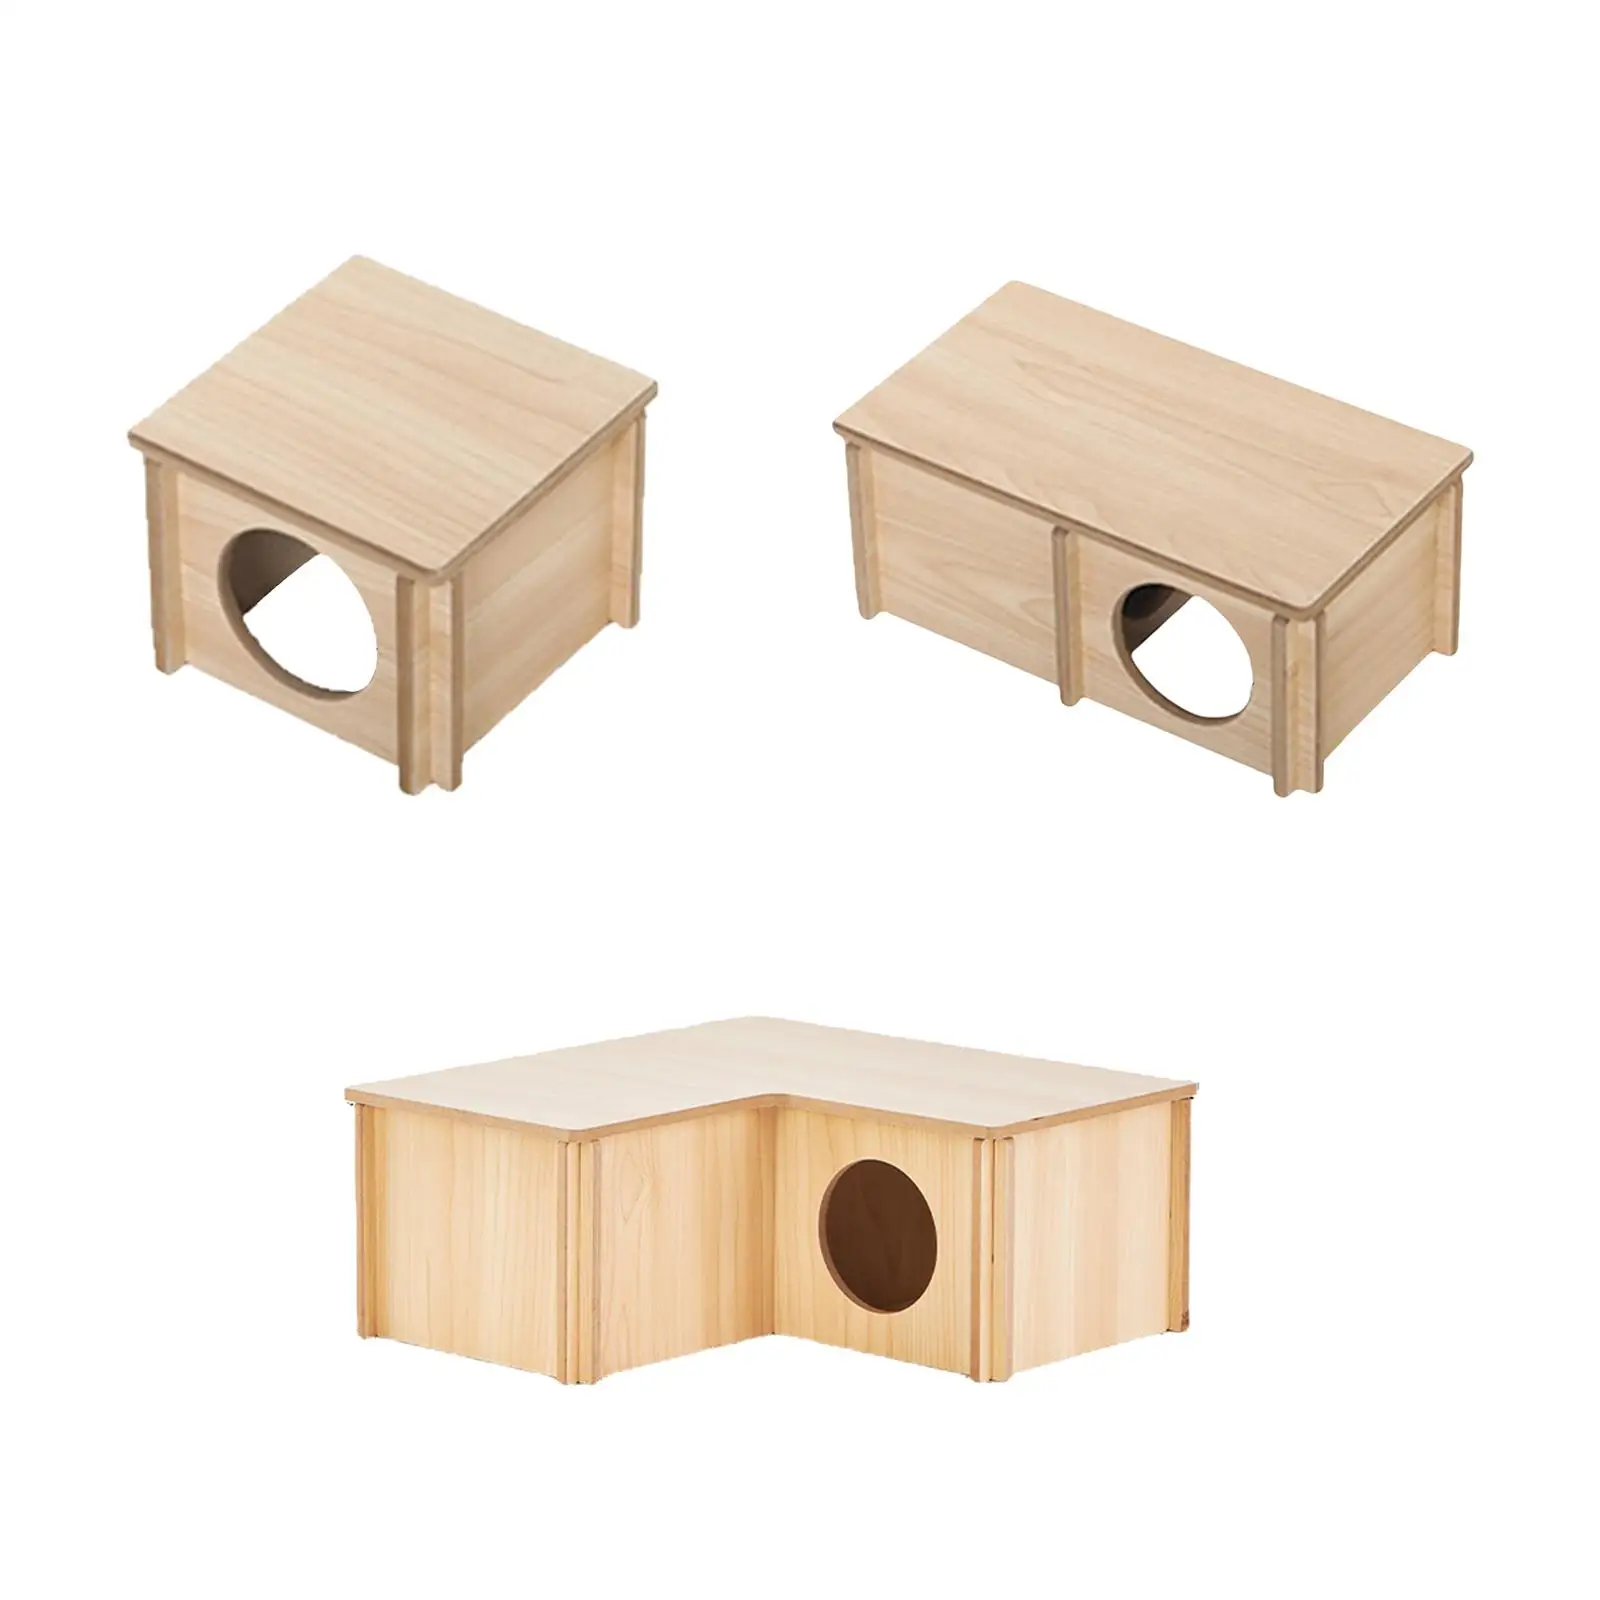 Wooden Hamster House Solid Wood Exploration Toy for Dwarf Hamster Mouse Rat